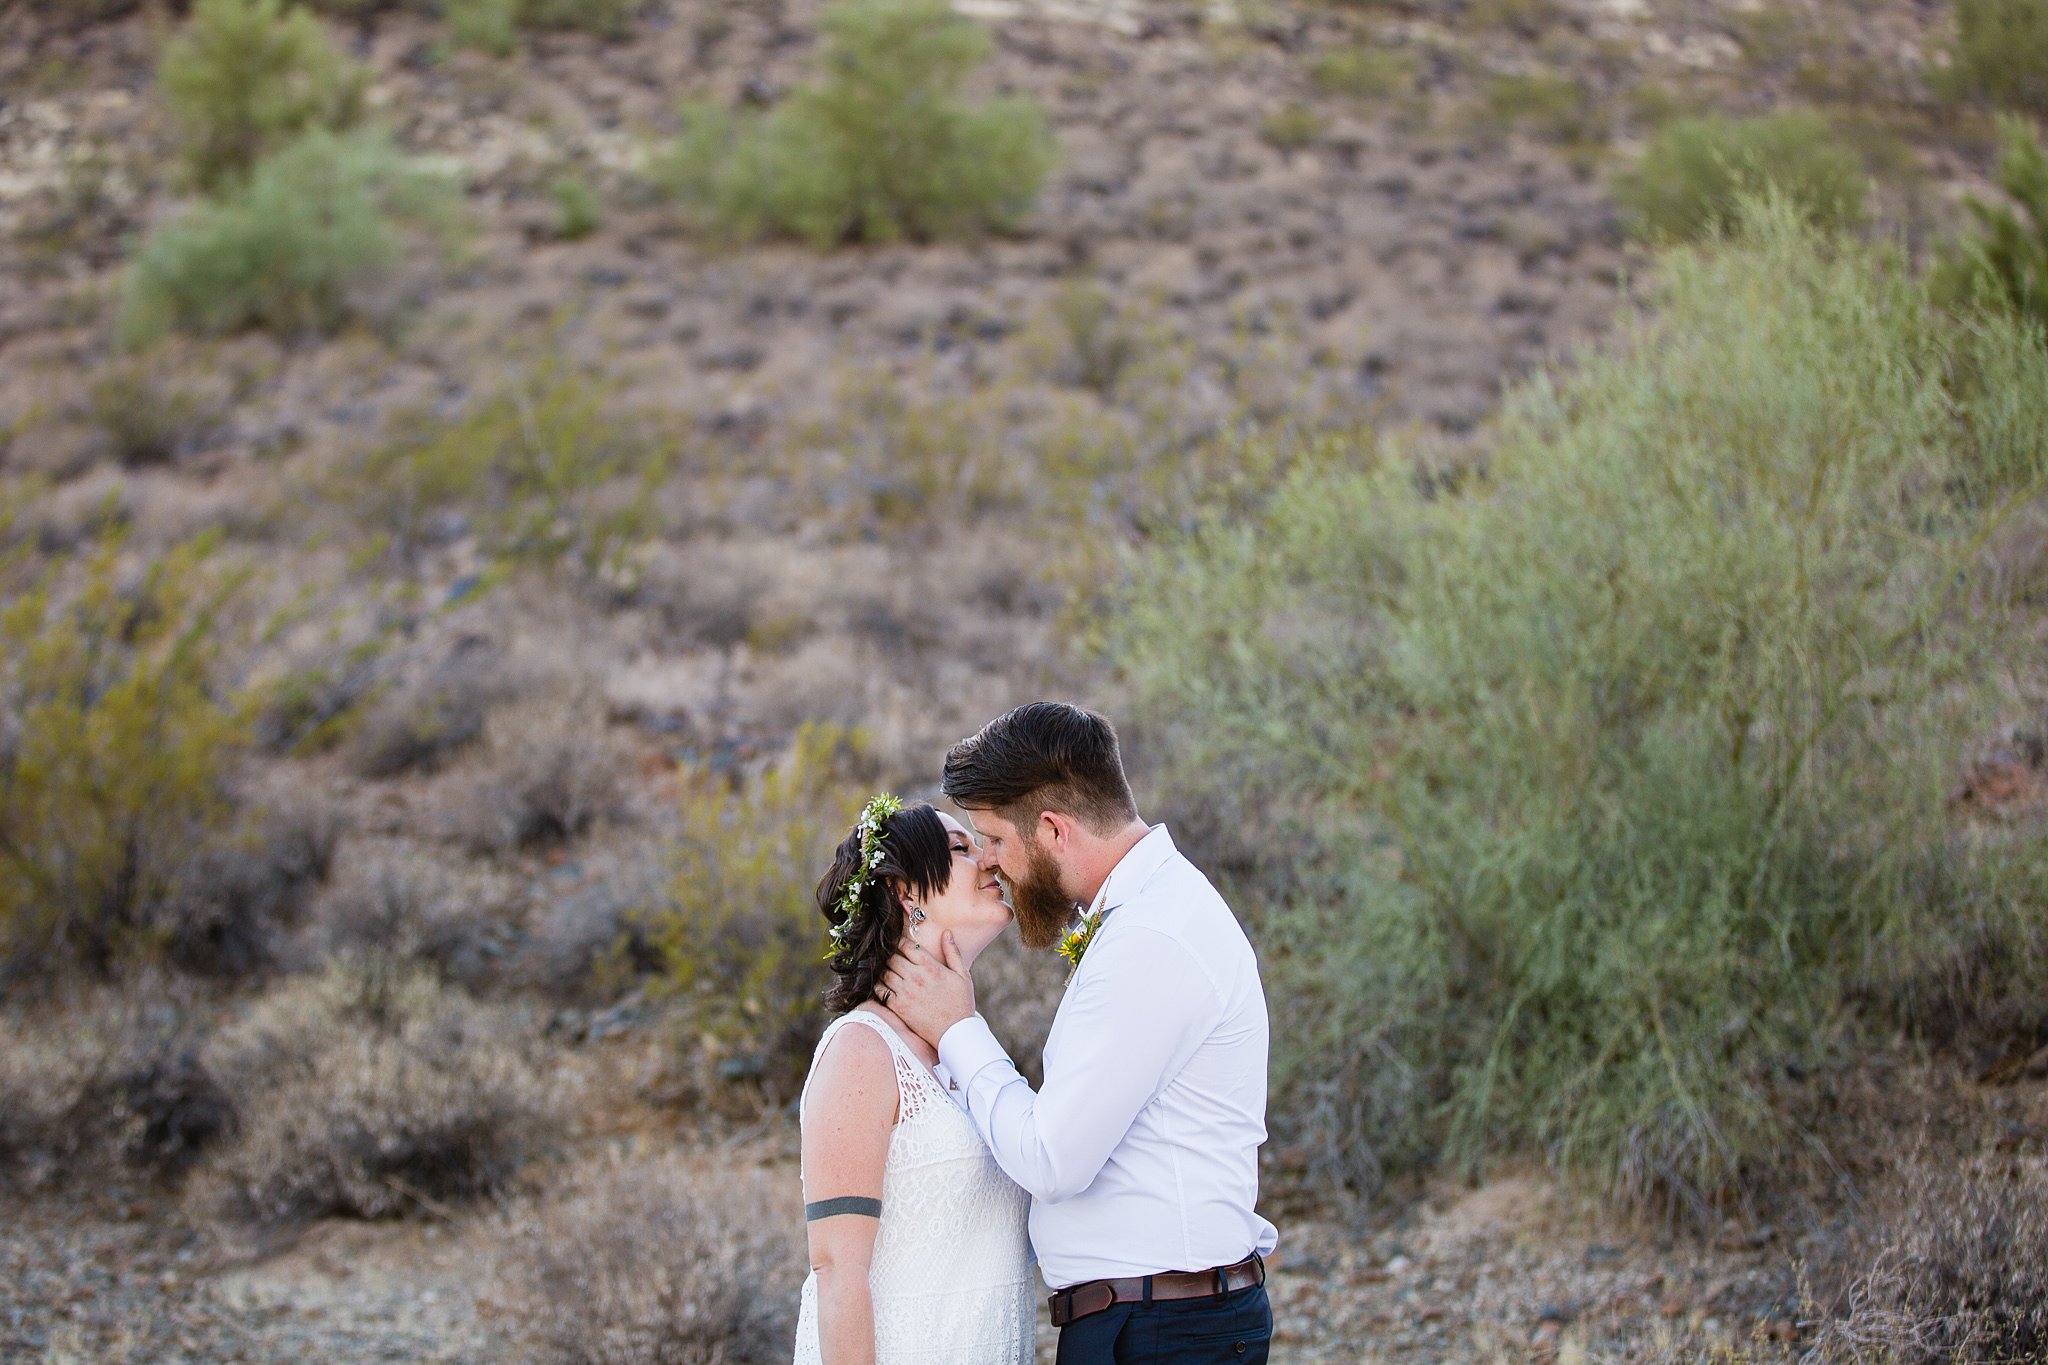 Bride and groom share an intimate moment during their first look by Arizona wedding photographers PMA Photography.